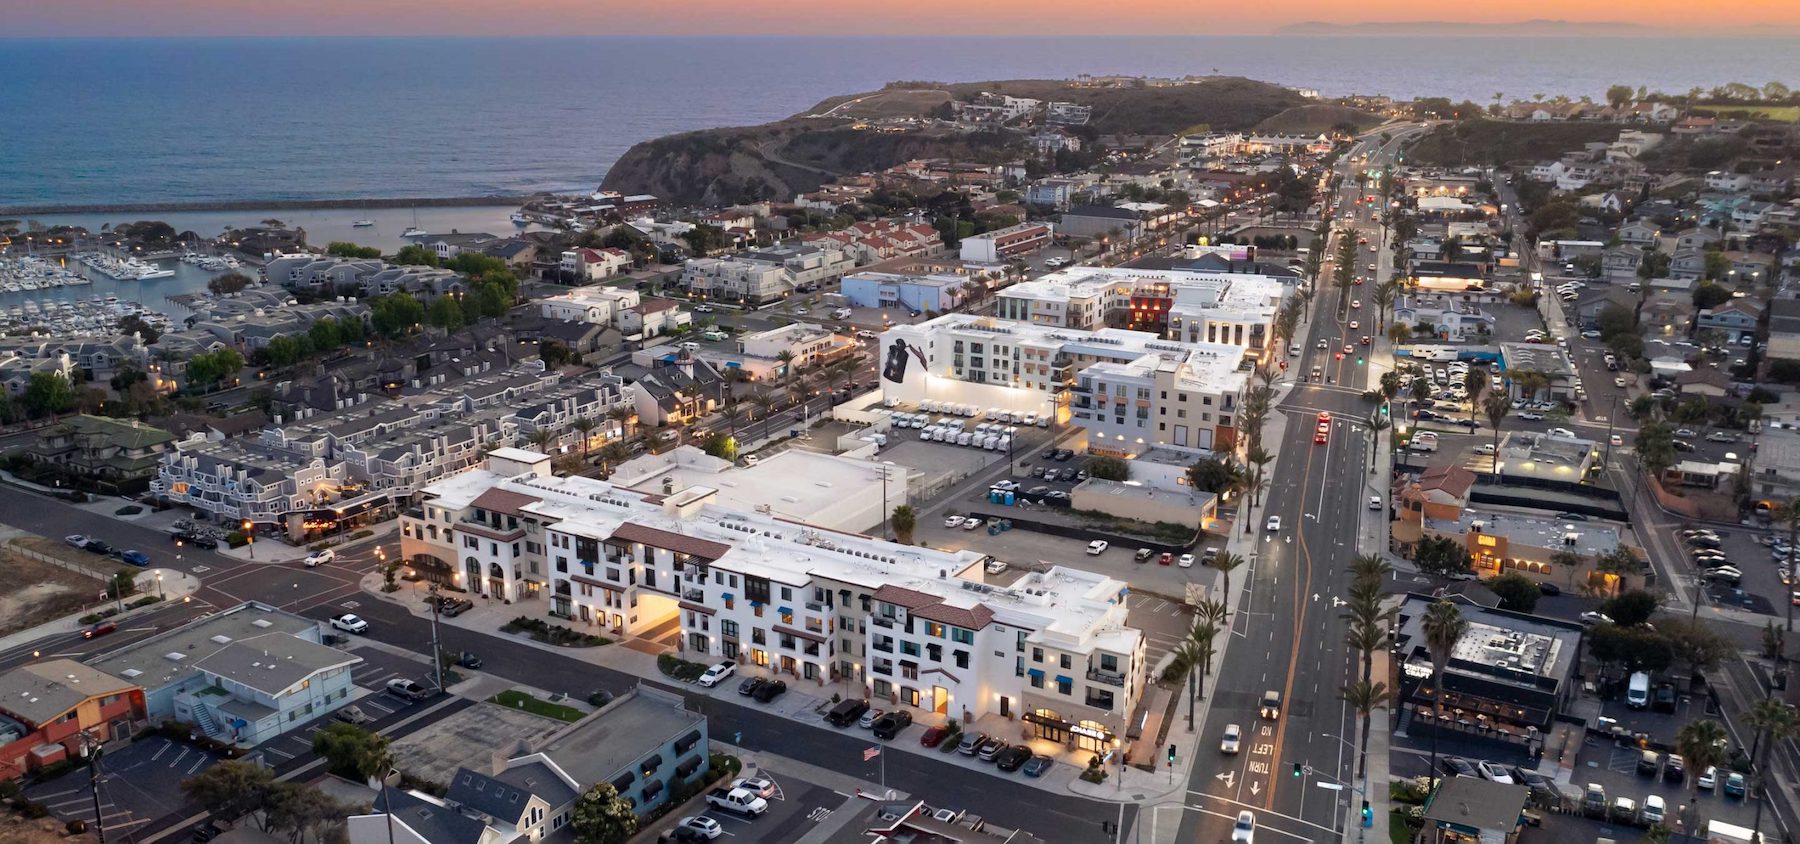 Prado West consists of three mixed-use buildings in downtown Dana Point, Calif.  Images: AO